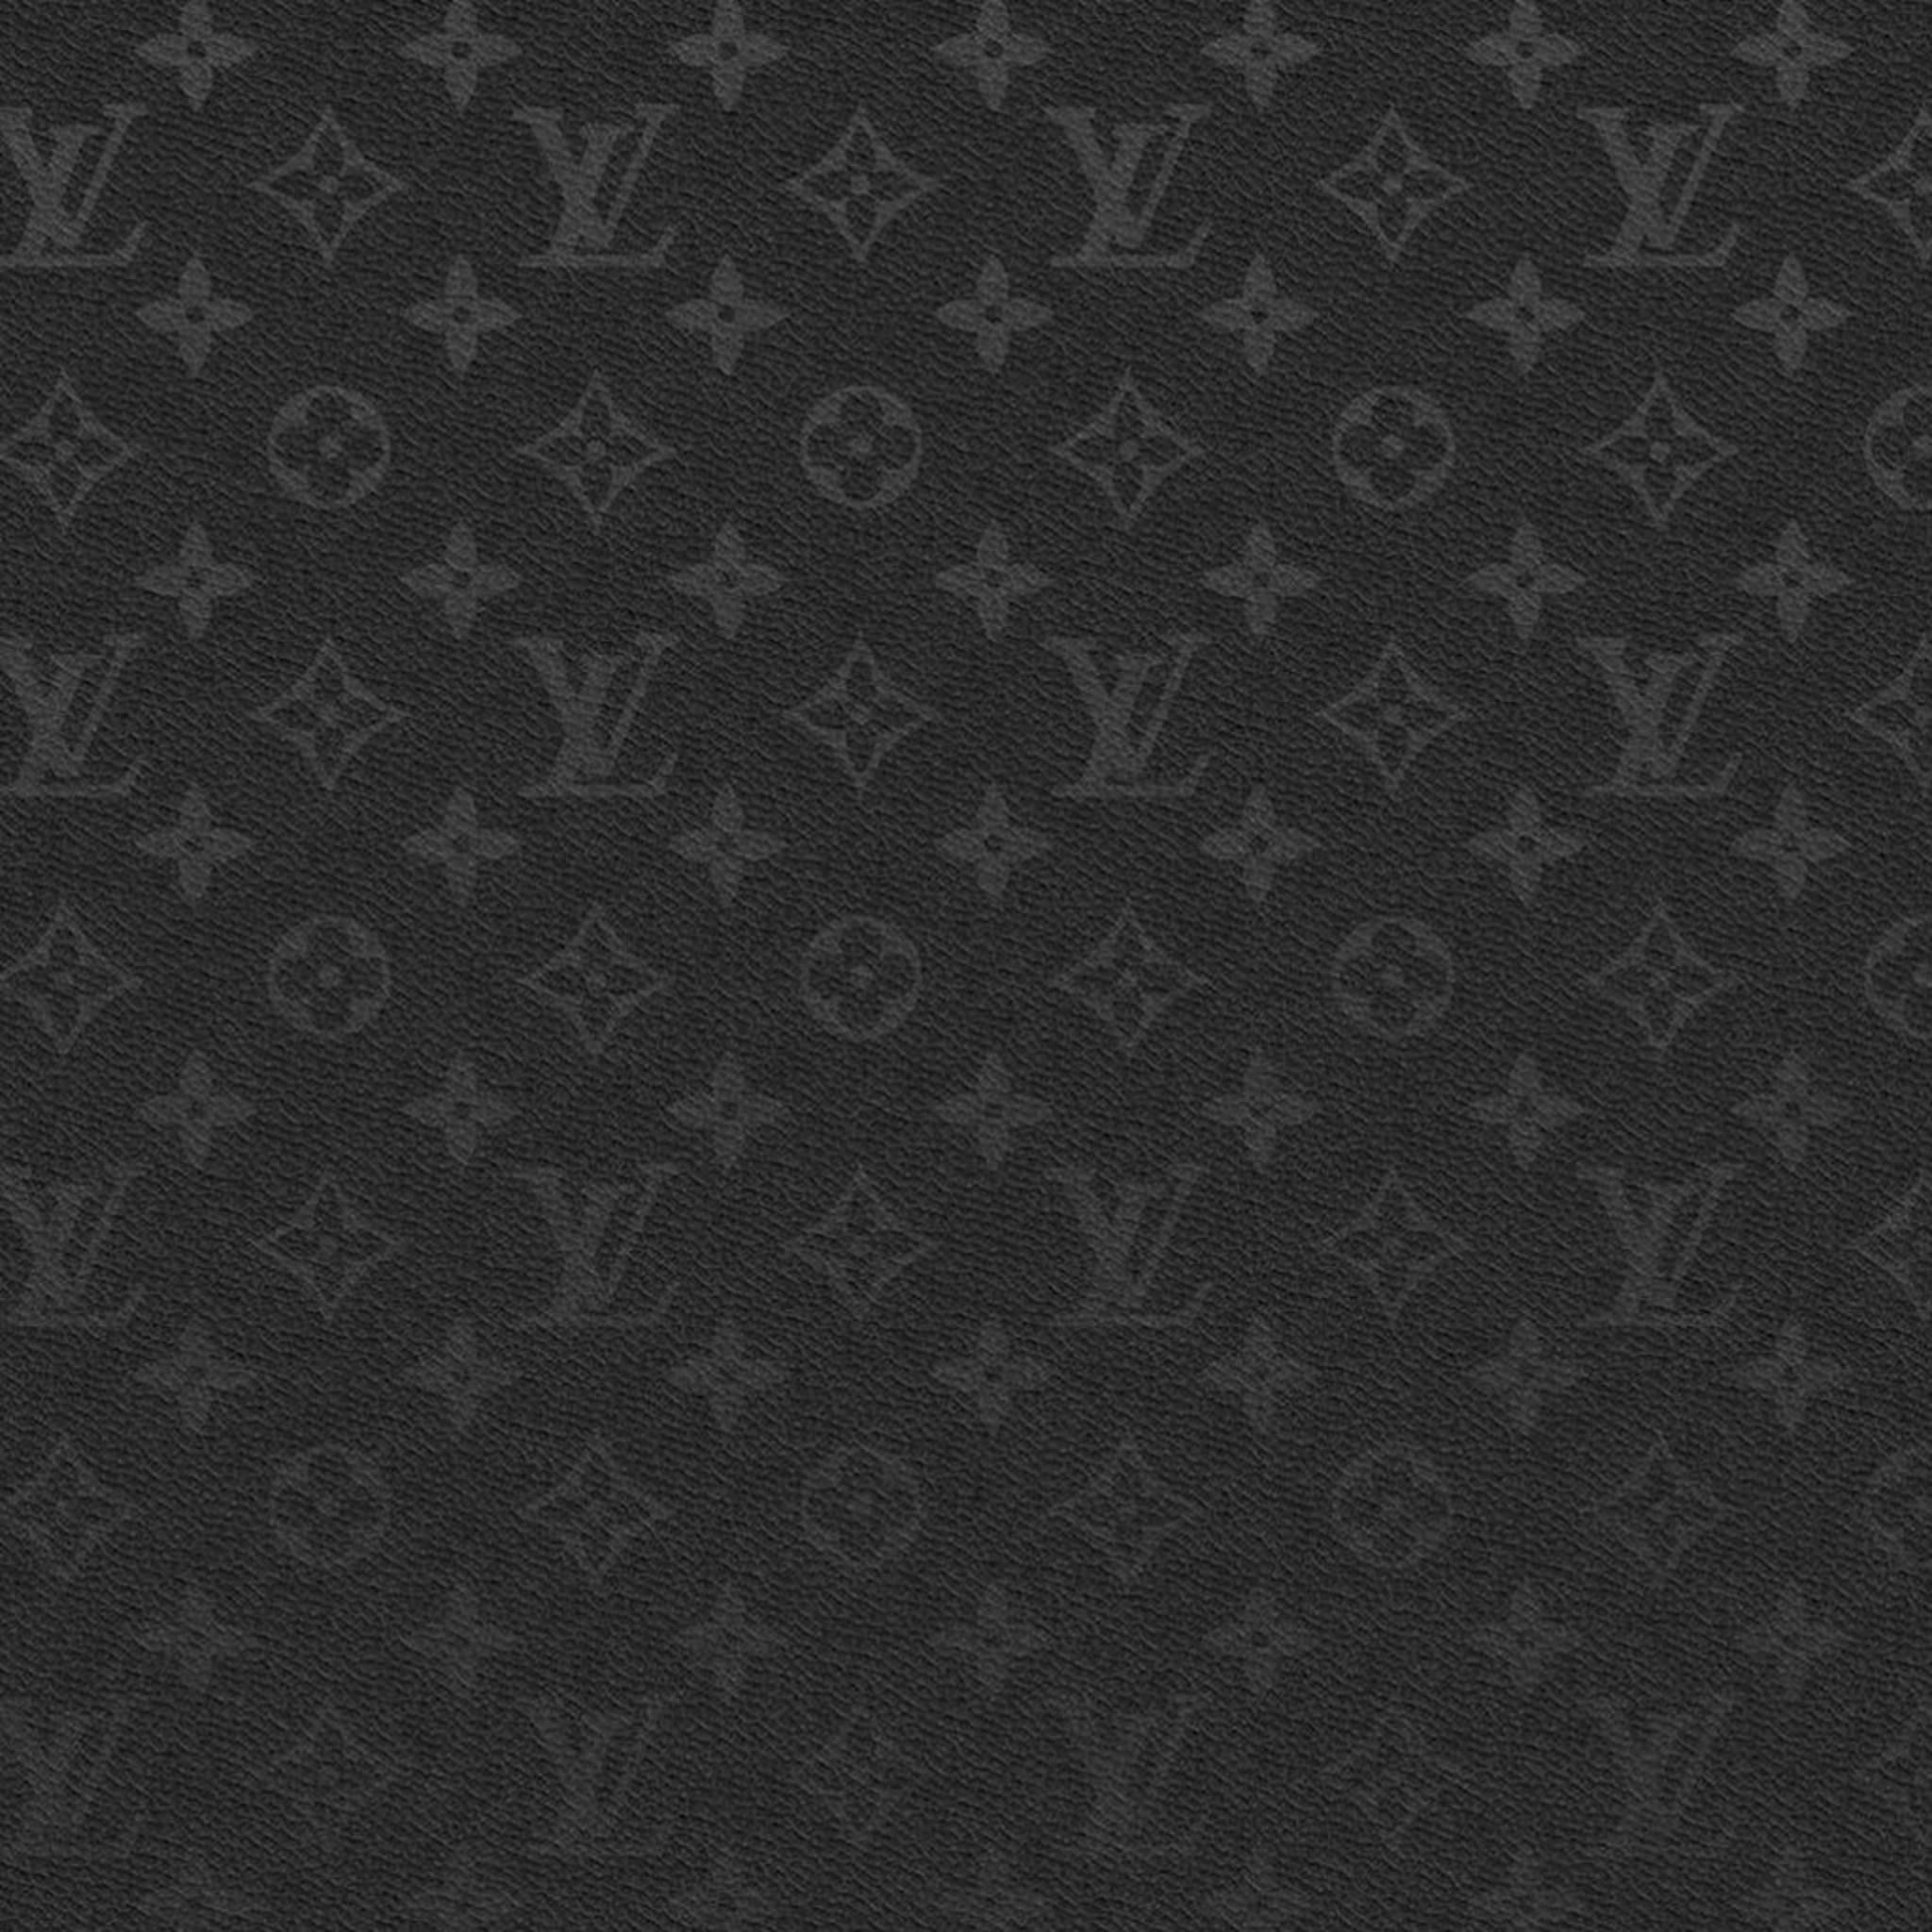 10+ Louis Vuitton HD Wallpapers and Backgrounds